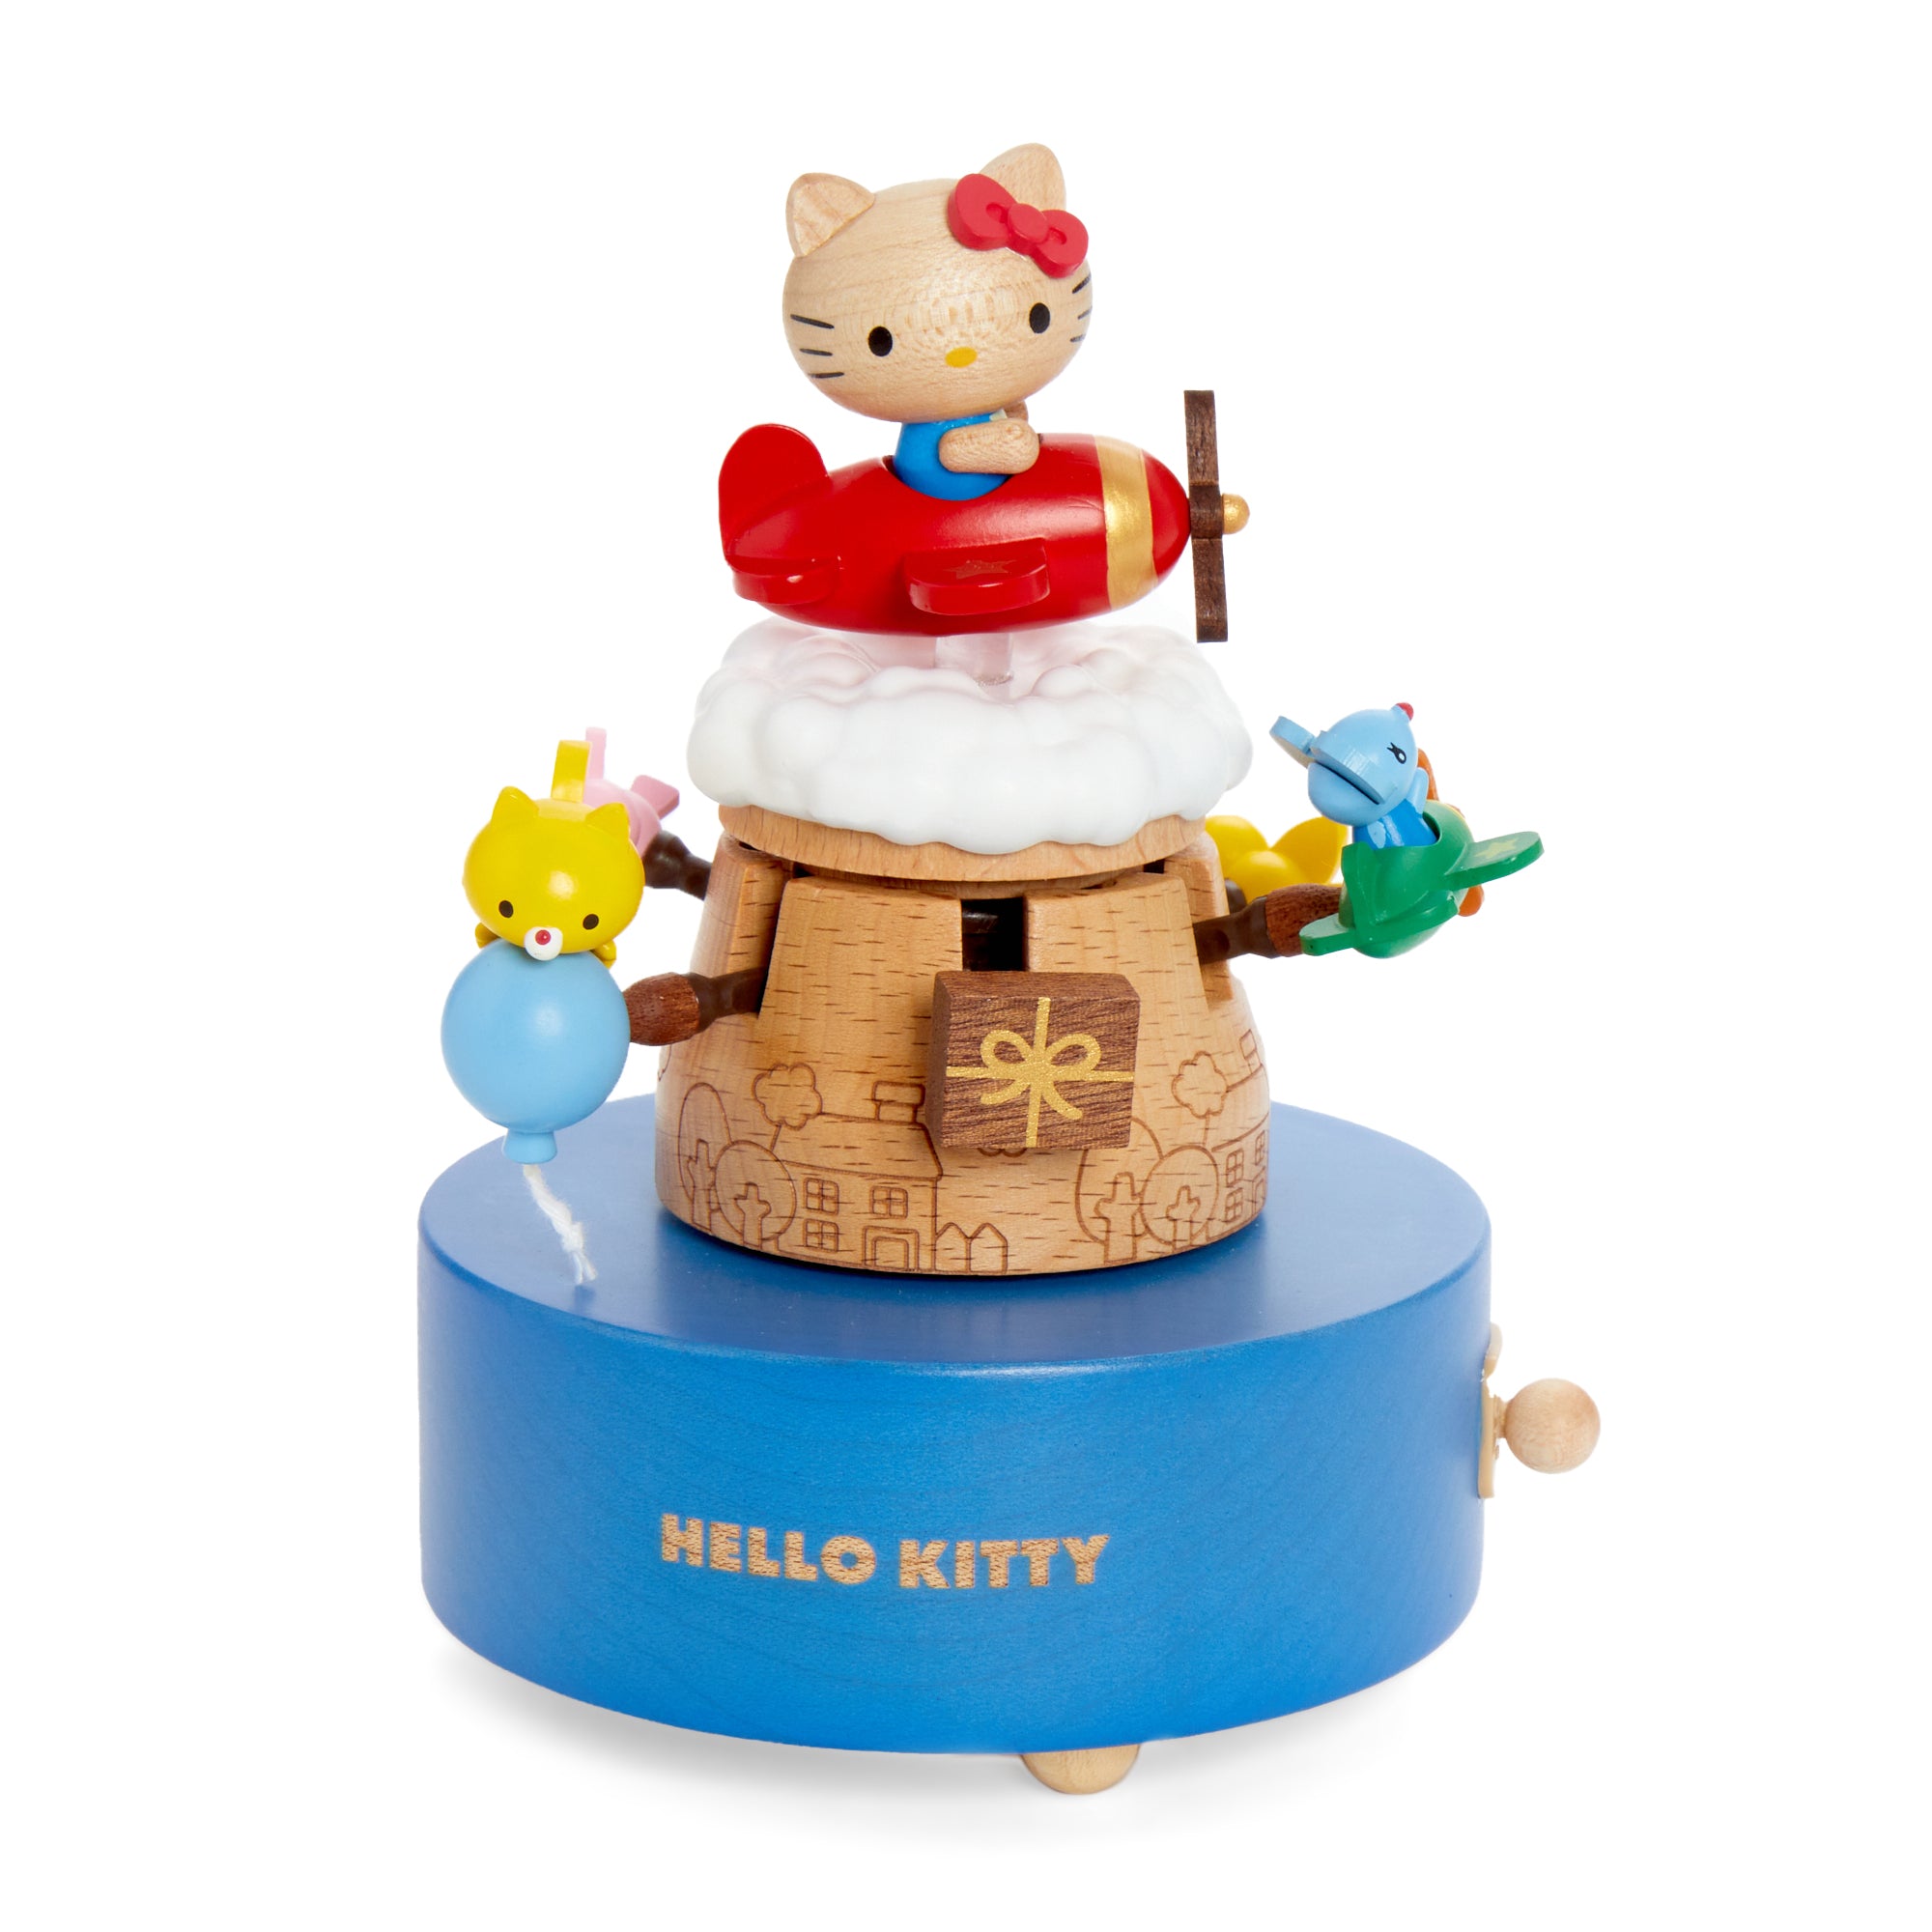 Hello Kitty and Friends Welcome to Sanrio Town 1000-Piece Puzzle